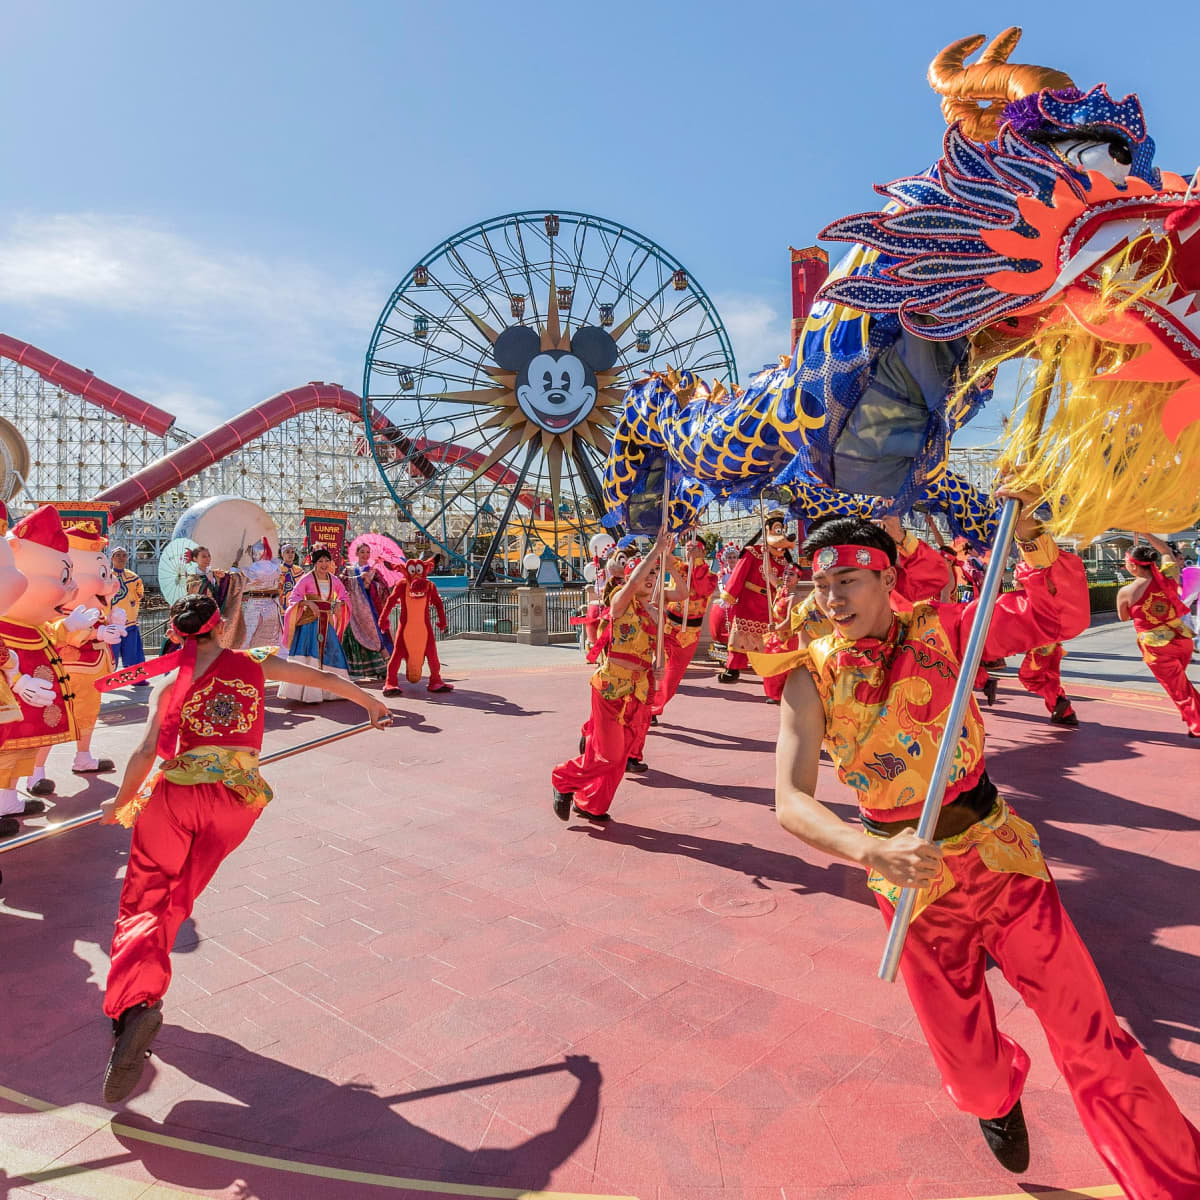 11 ways to celebrate the Lunar New Year in Southern California